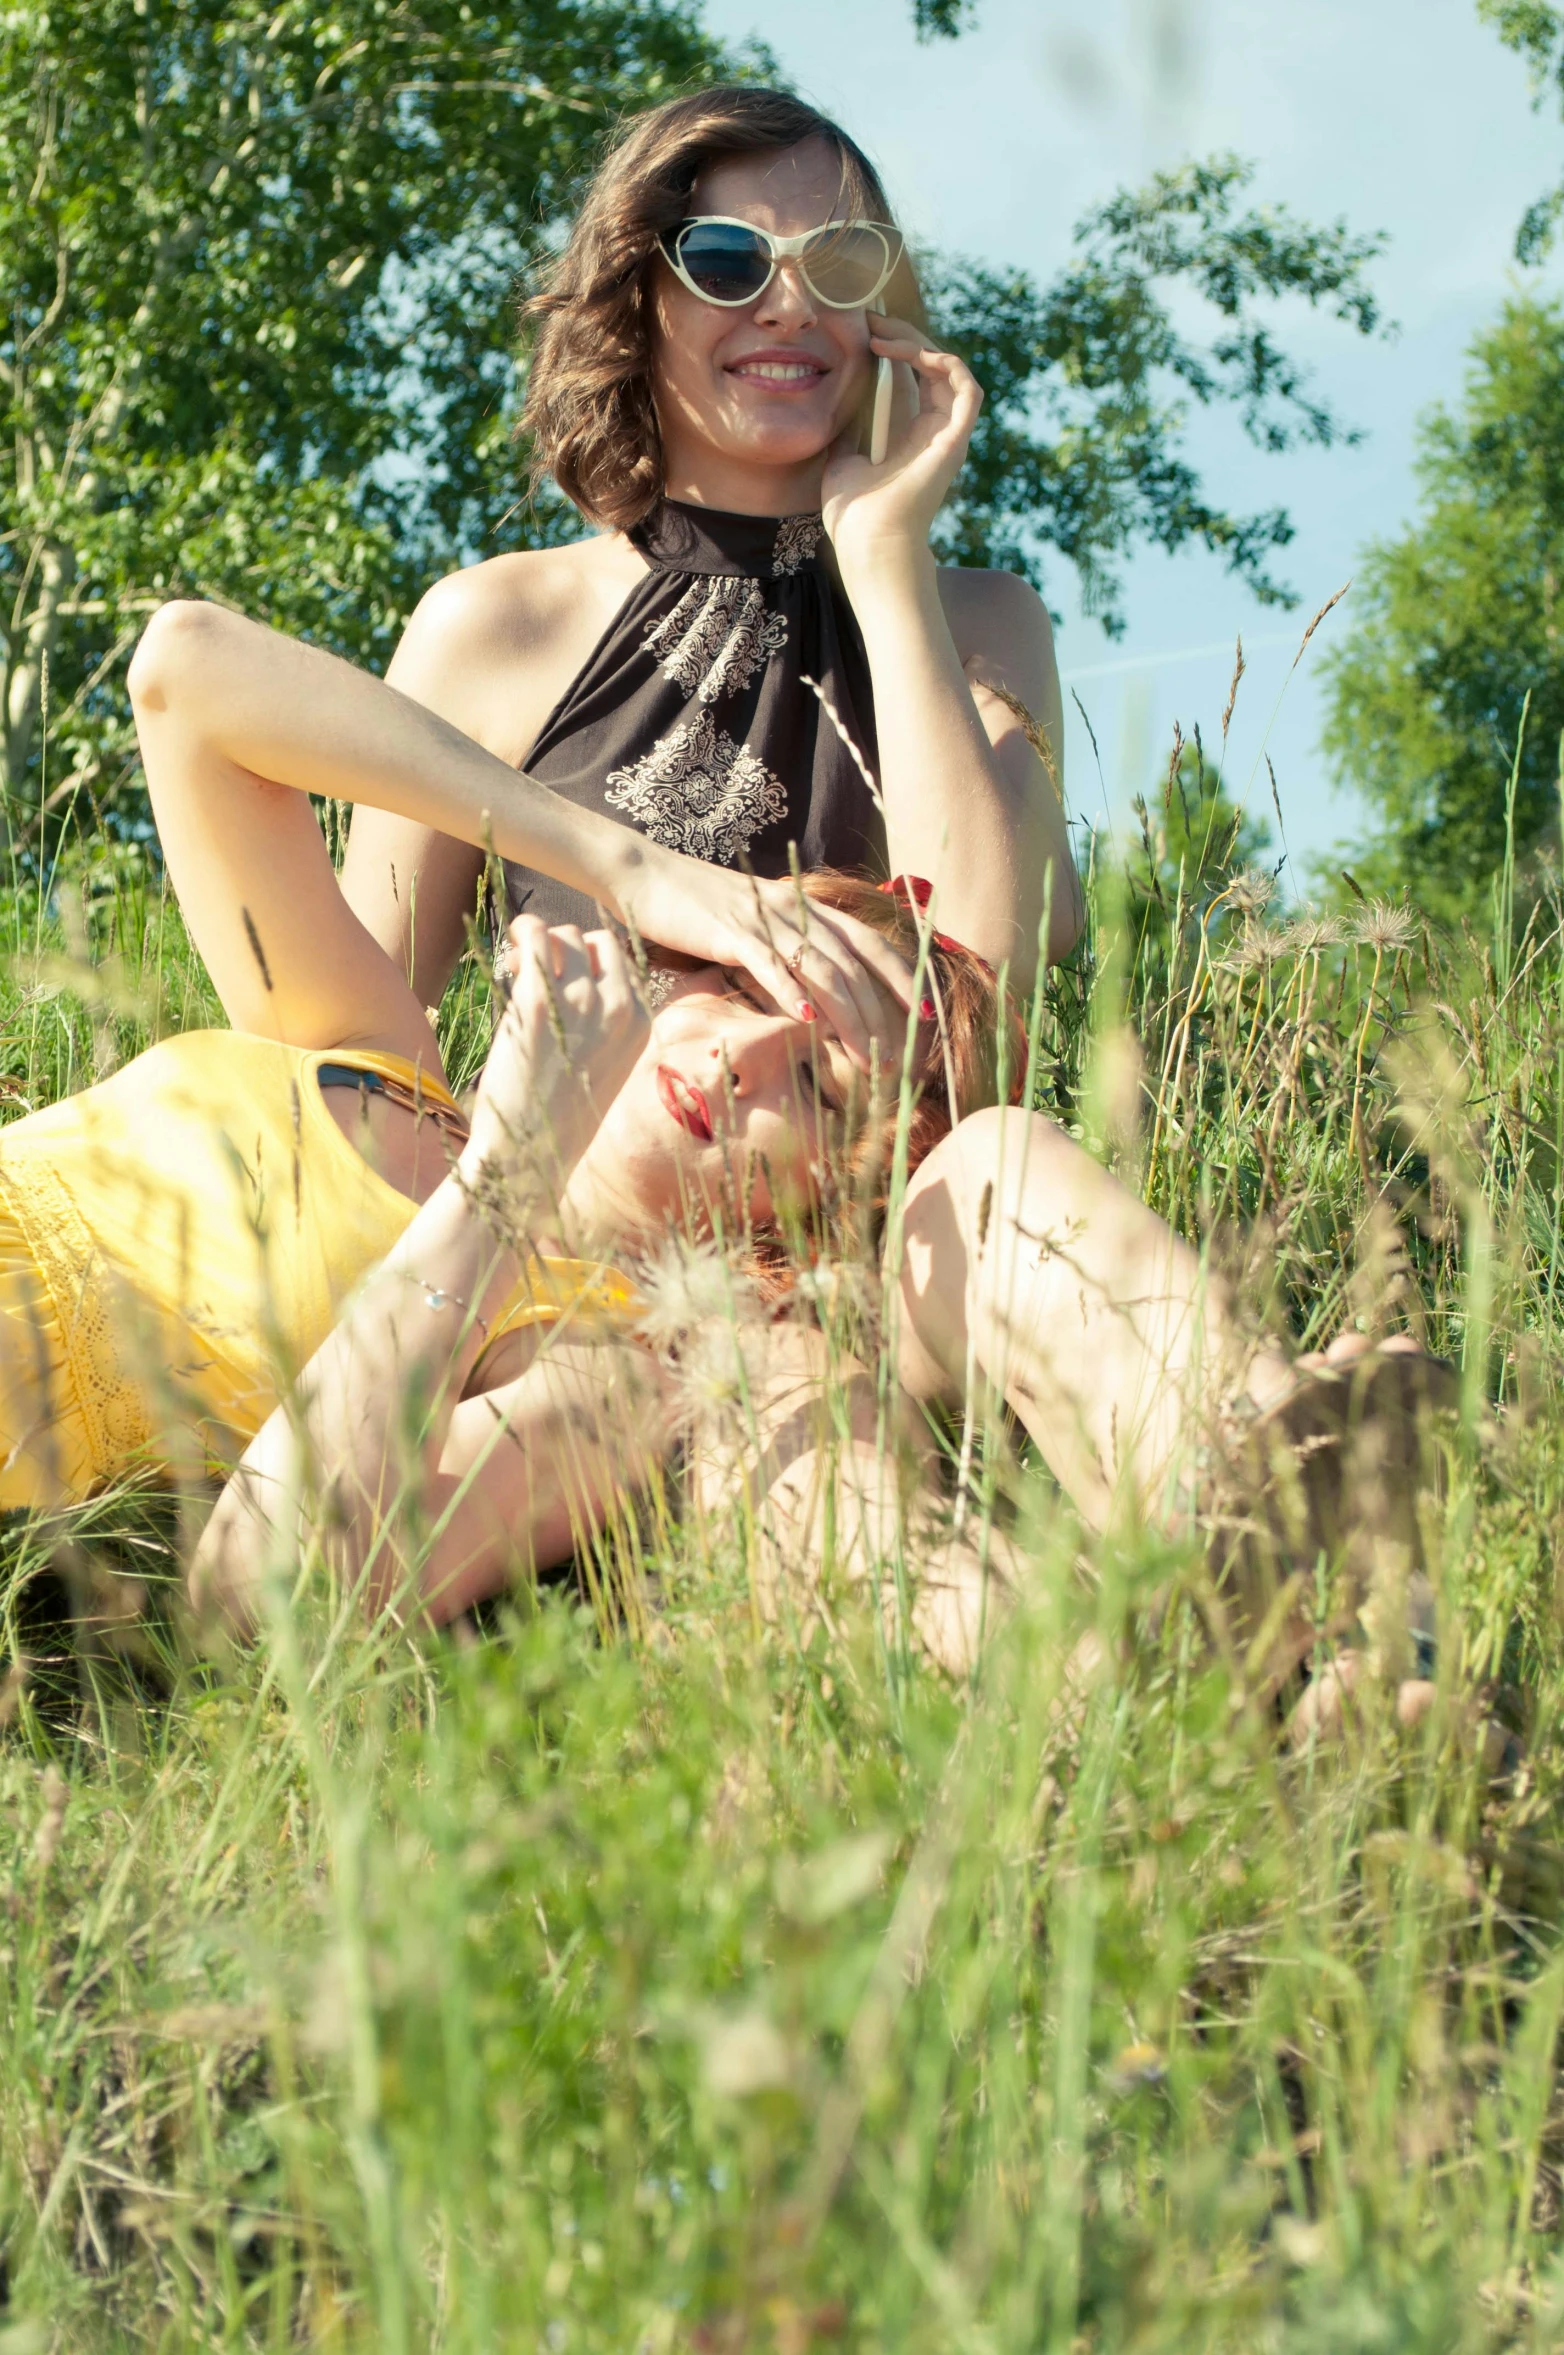 a woman is smiling and posing on the grass